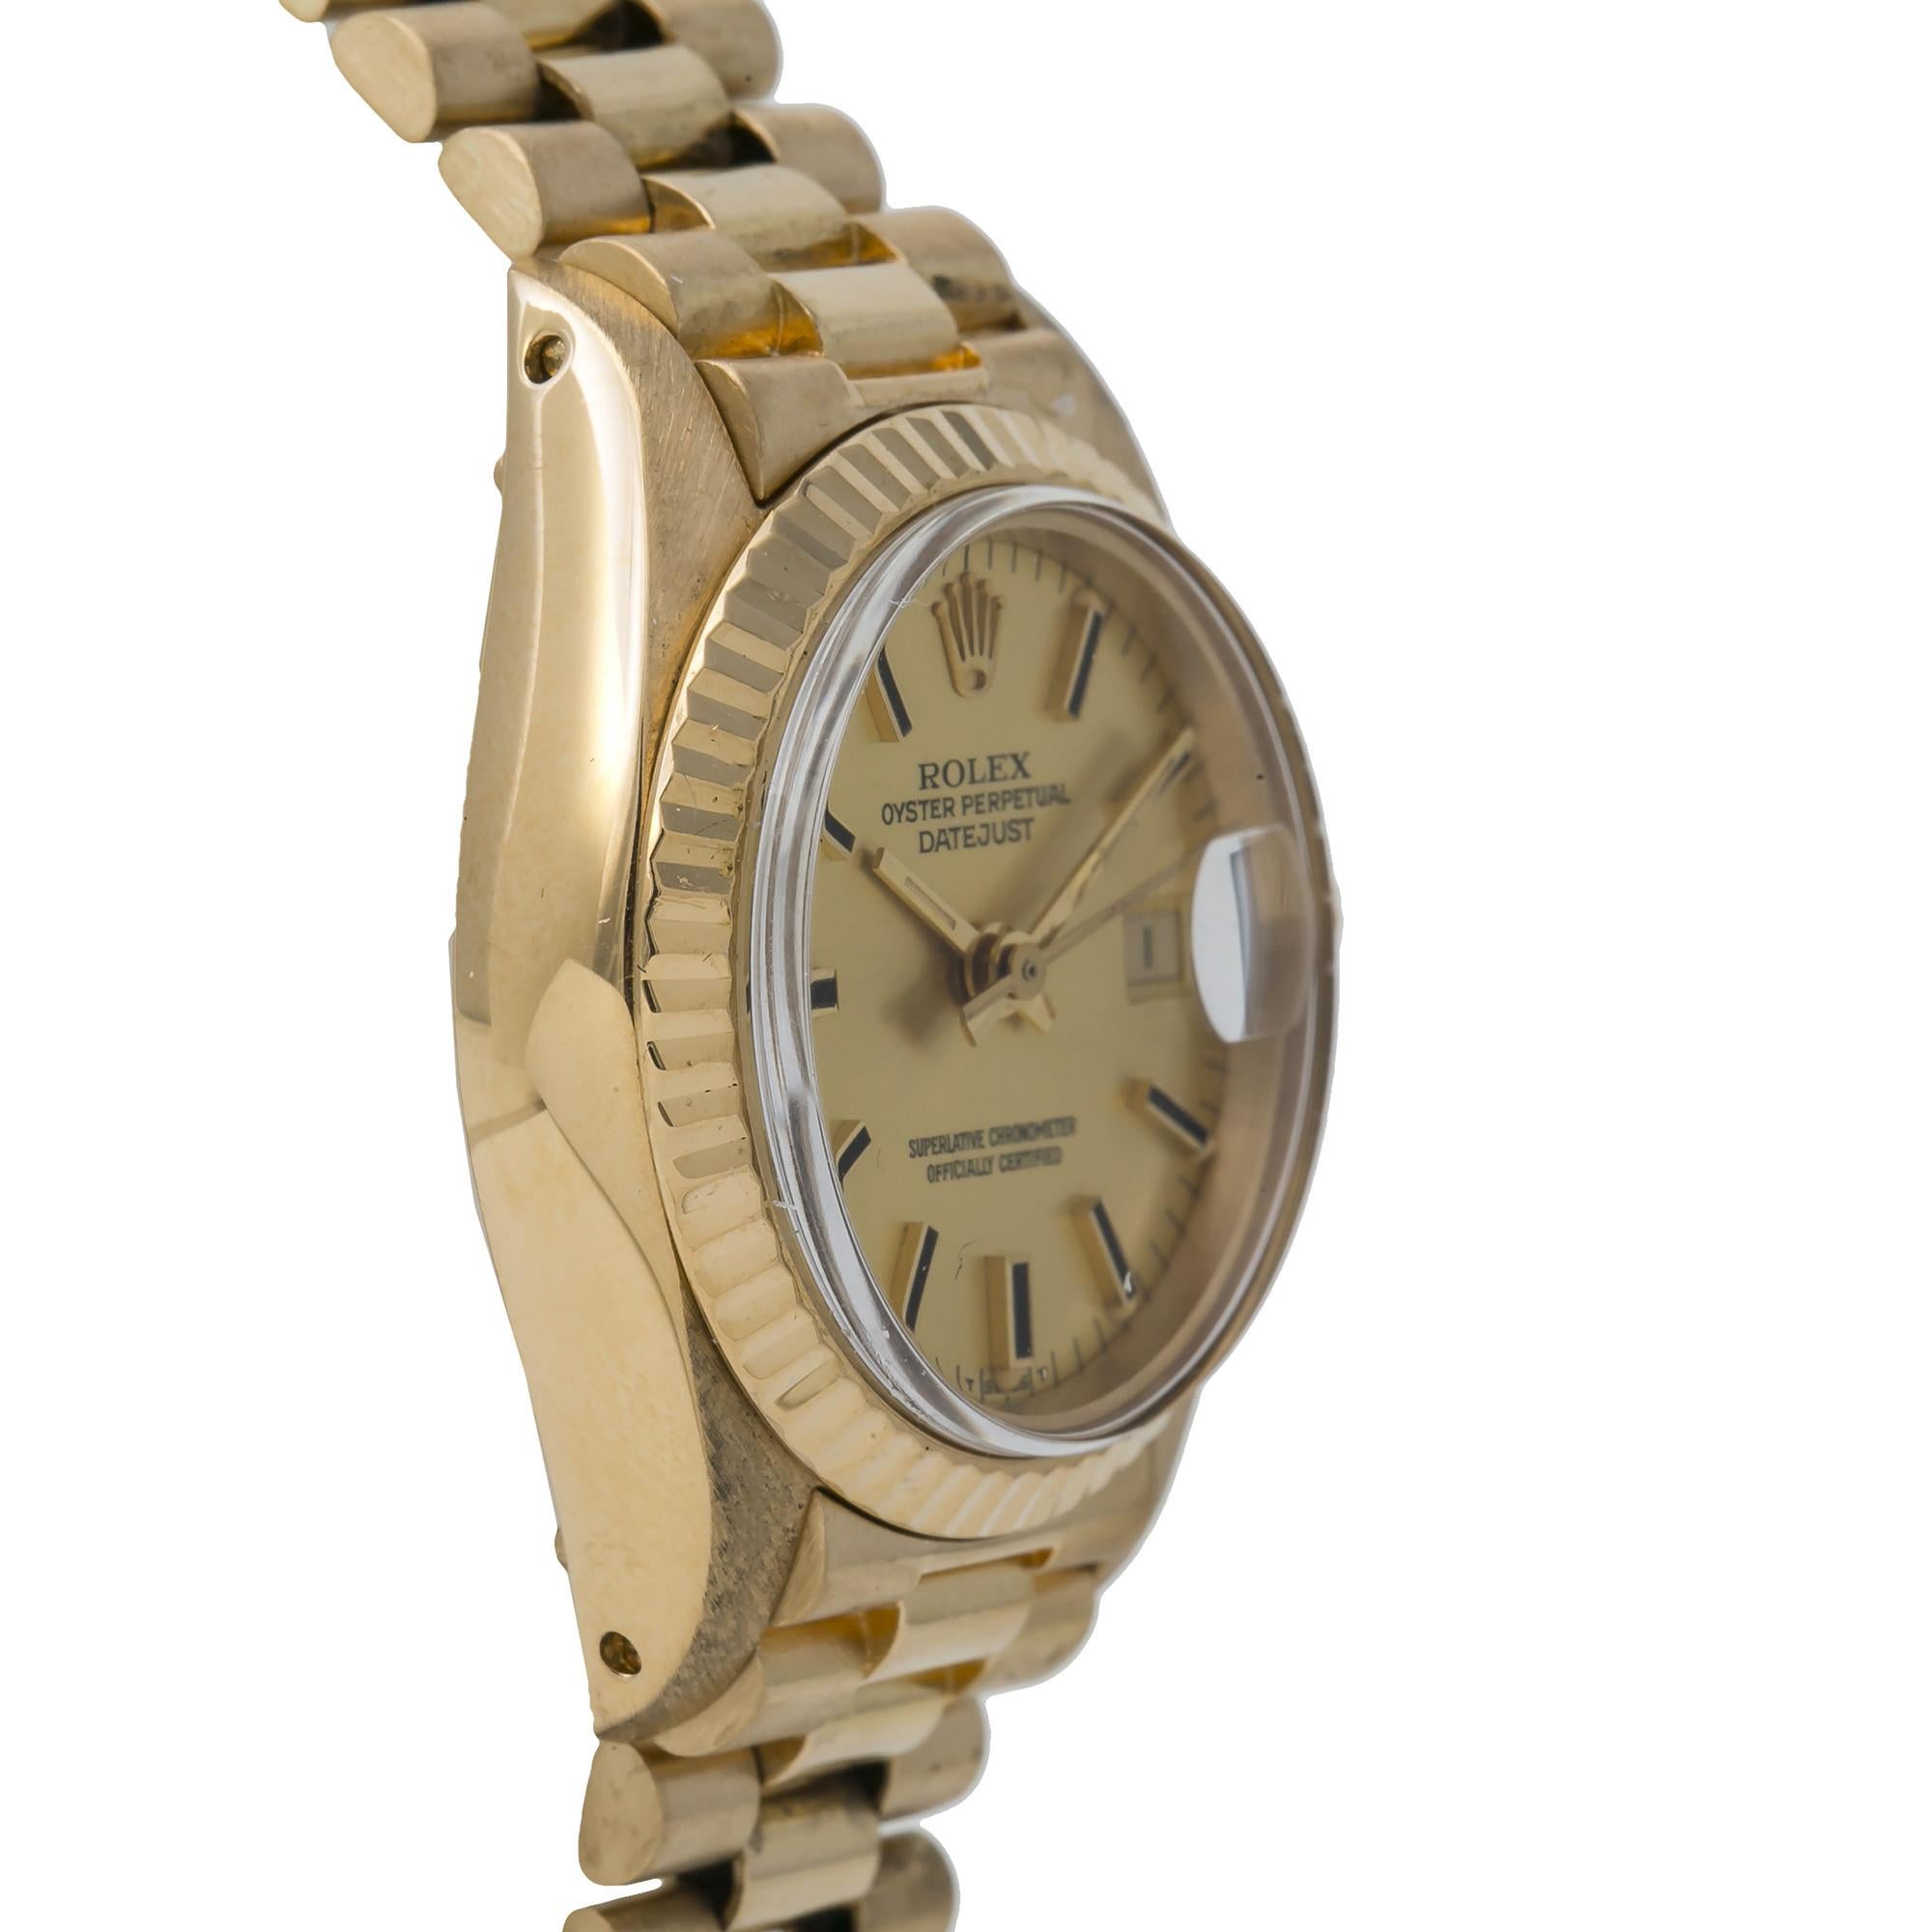 Rolex Datejust 6917, Champagne Dial, Certified and Warranty 2